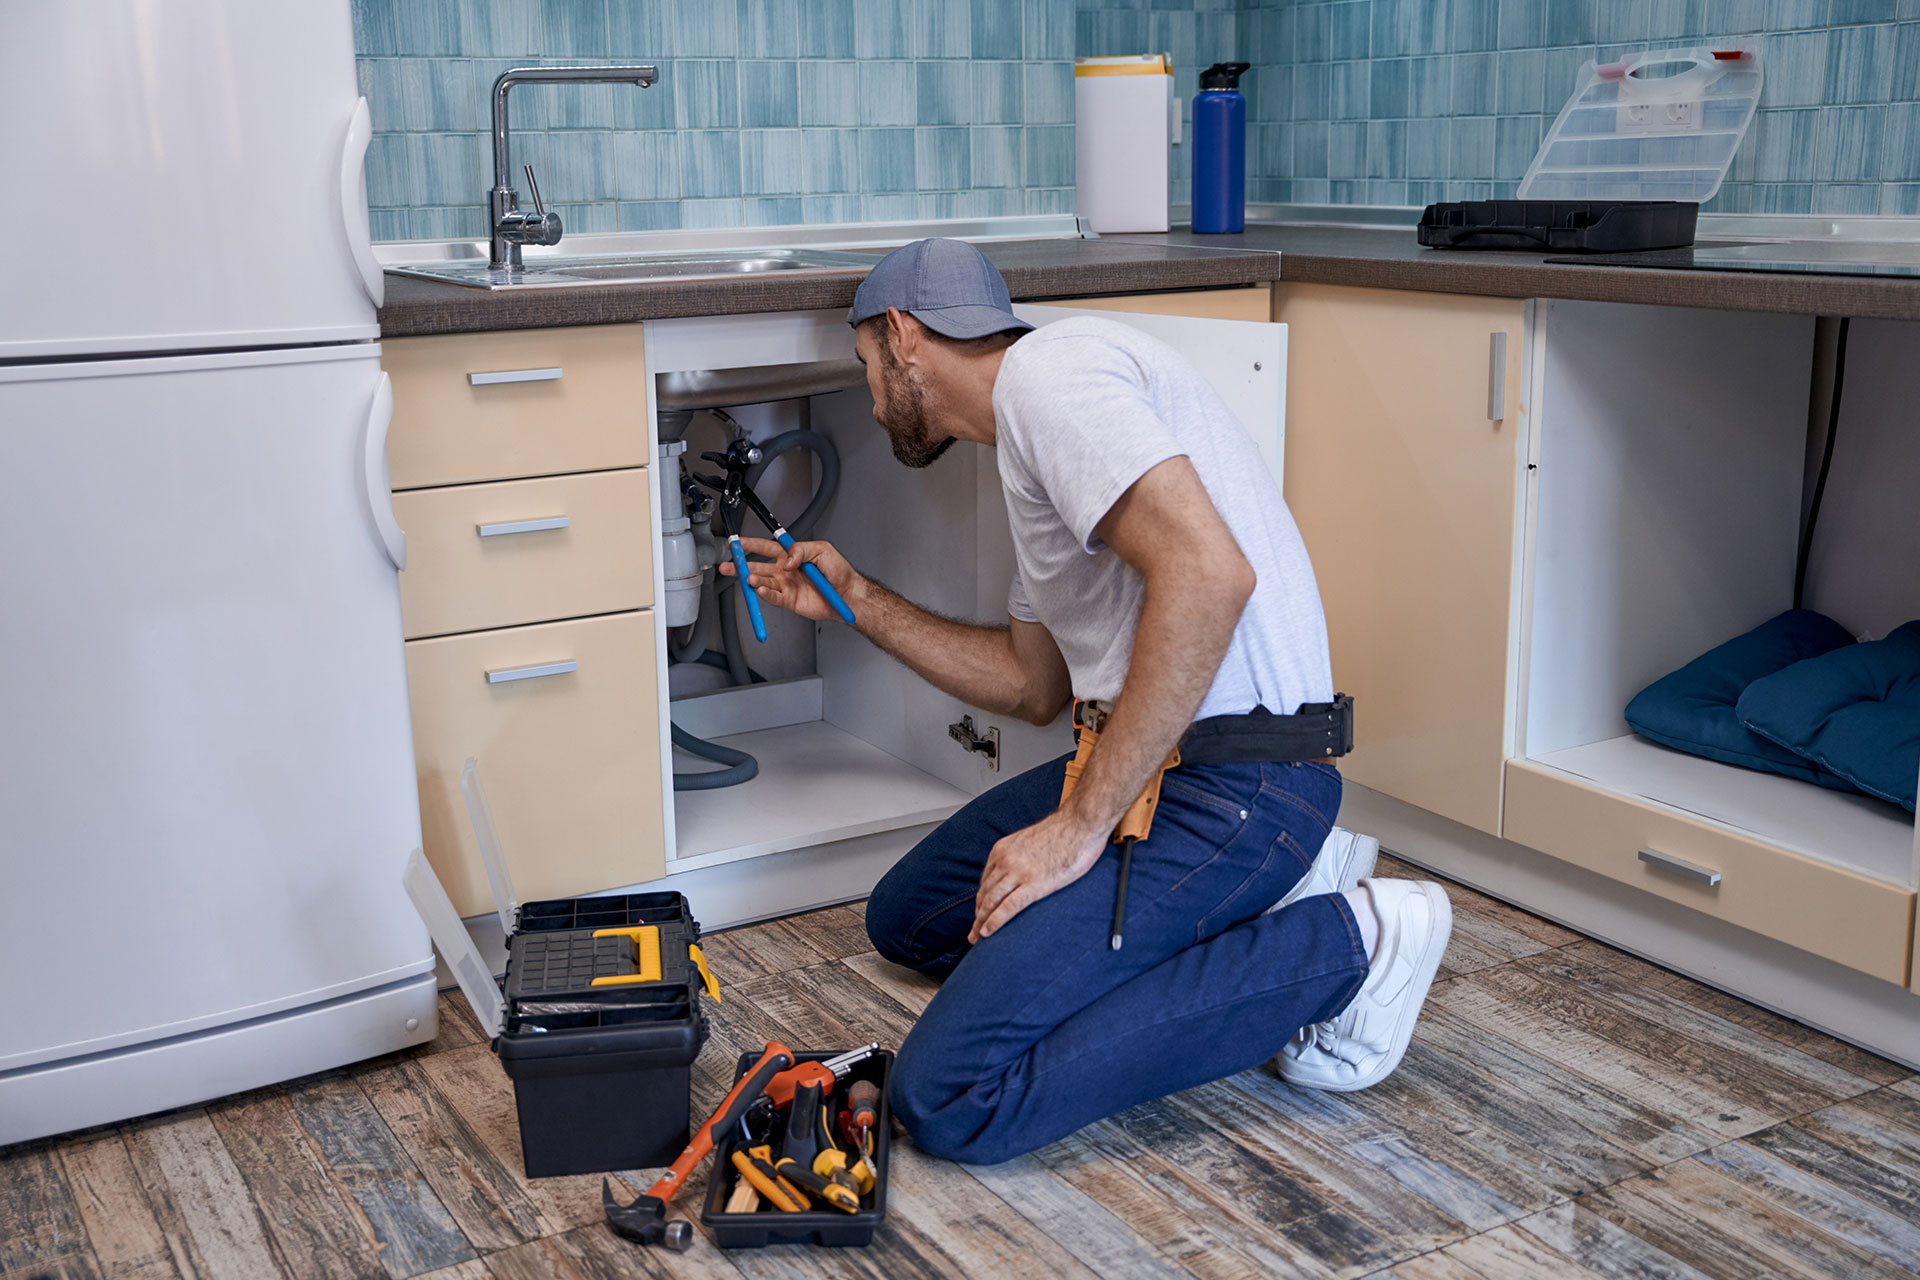 8 Most Common Plumbing Problems